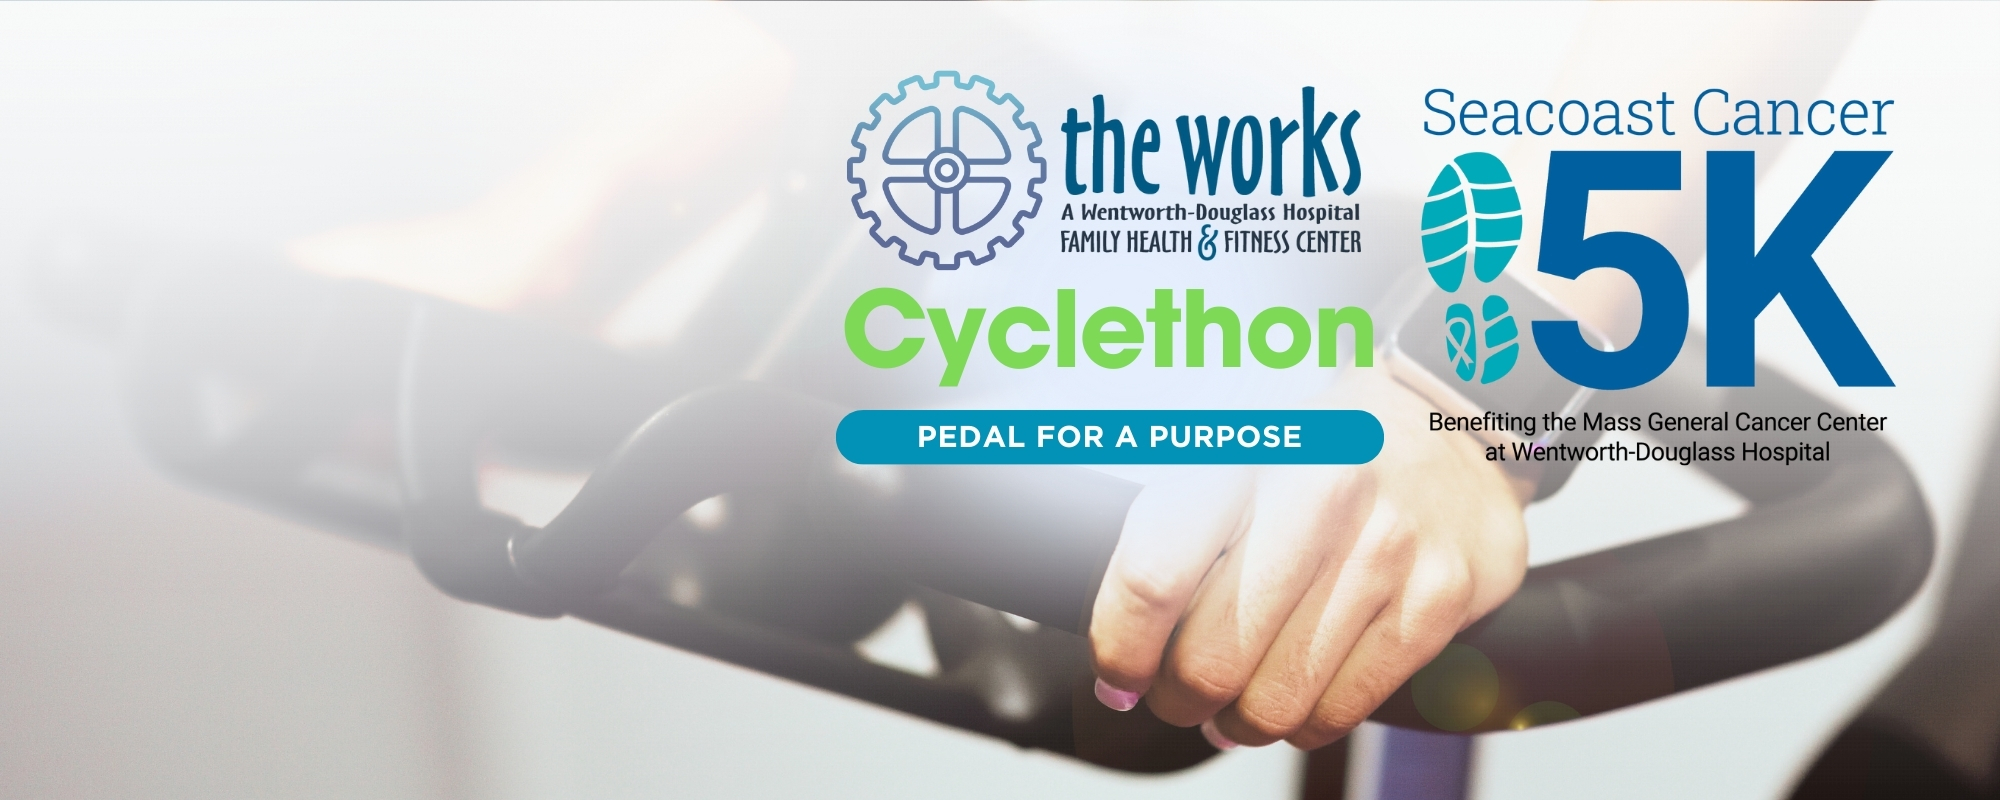 Works Logo with Cyclethon and Seacoast Cancer 5k Logo